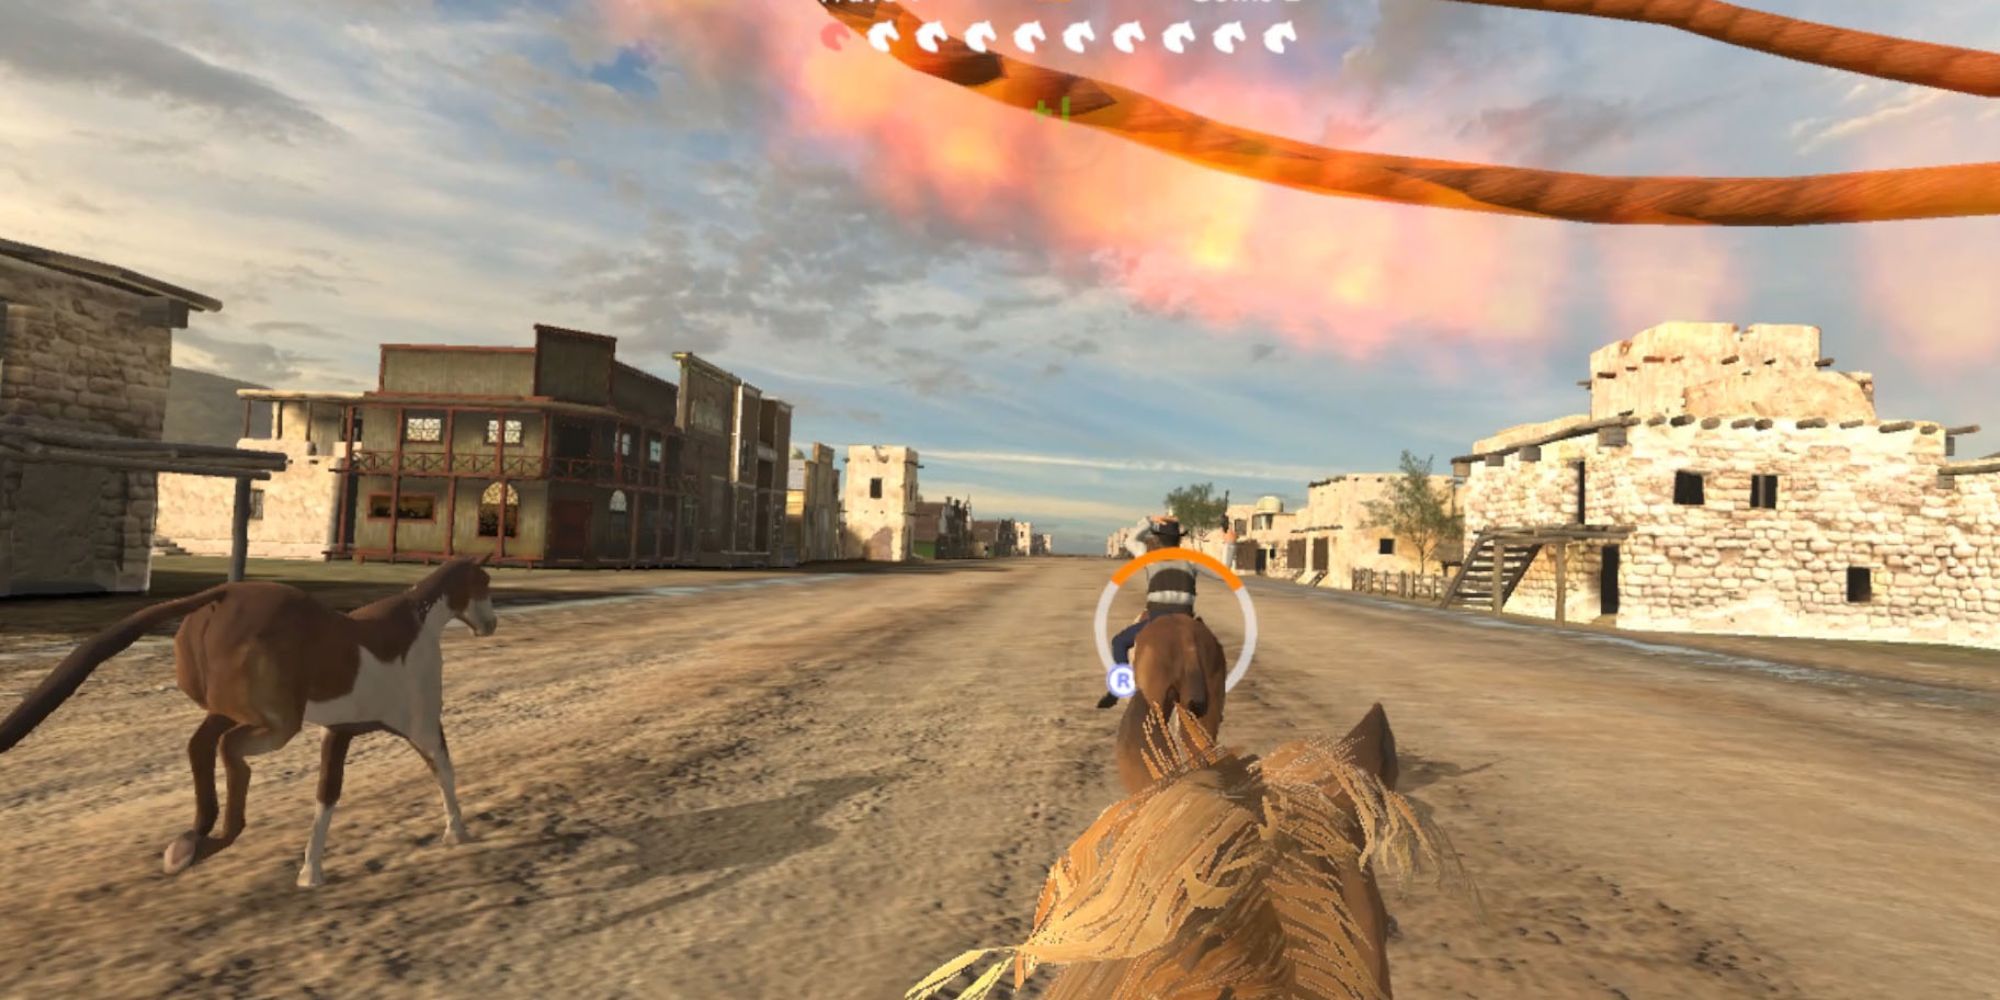 Racing and pulling people from horseback in VirZOOM Arcade